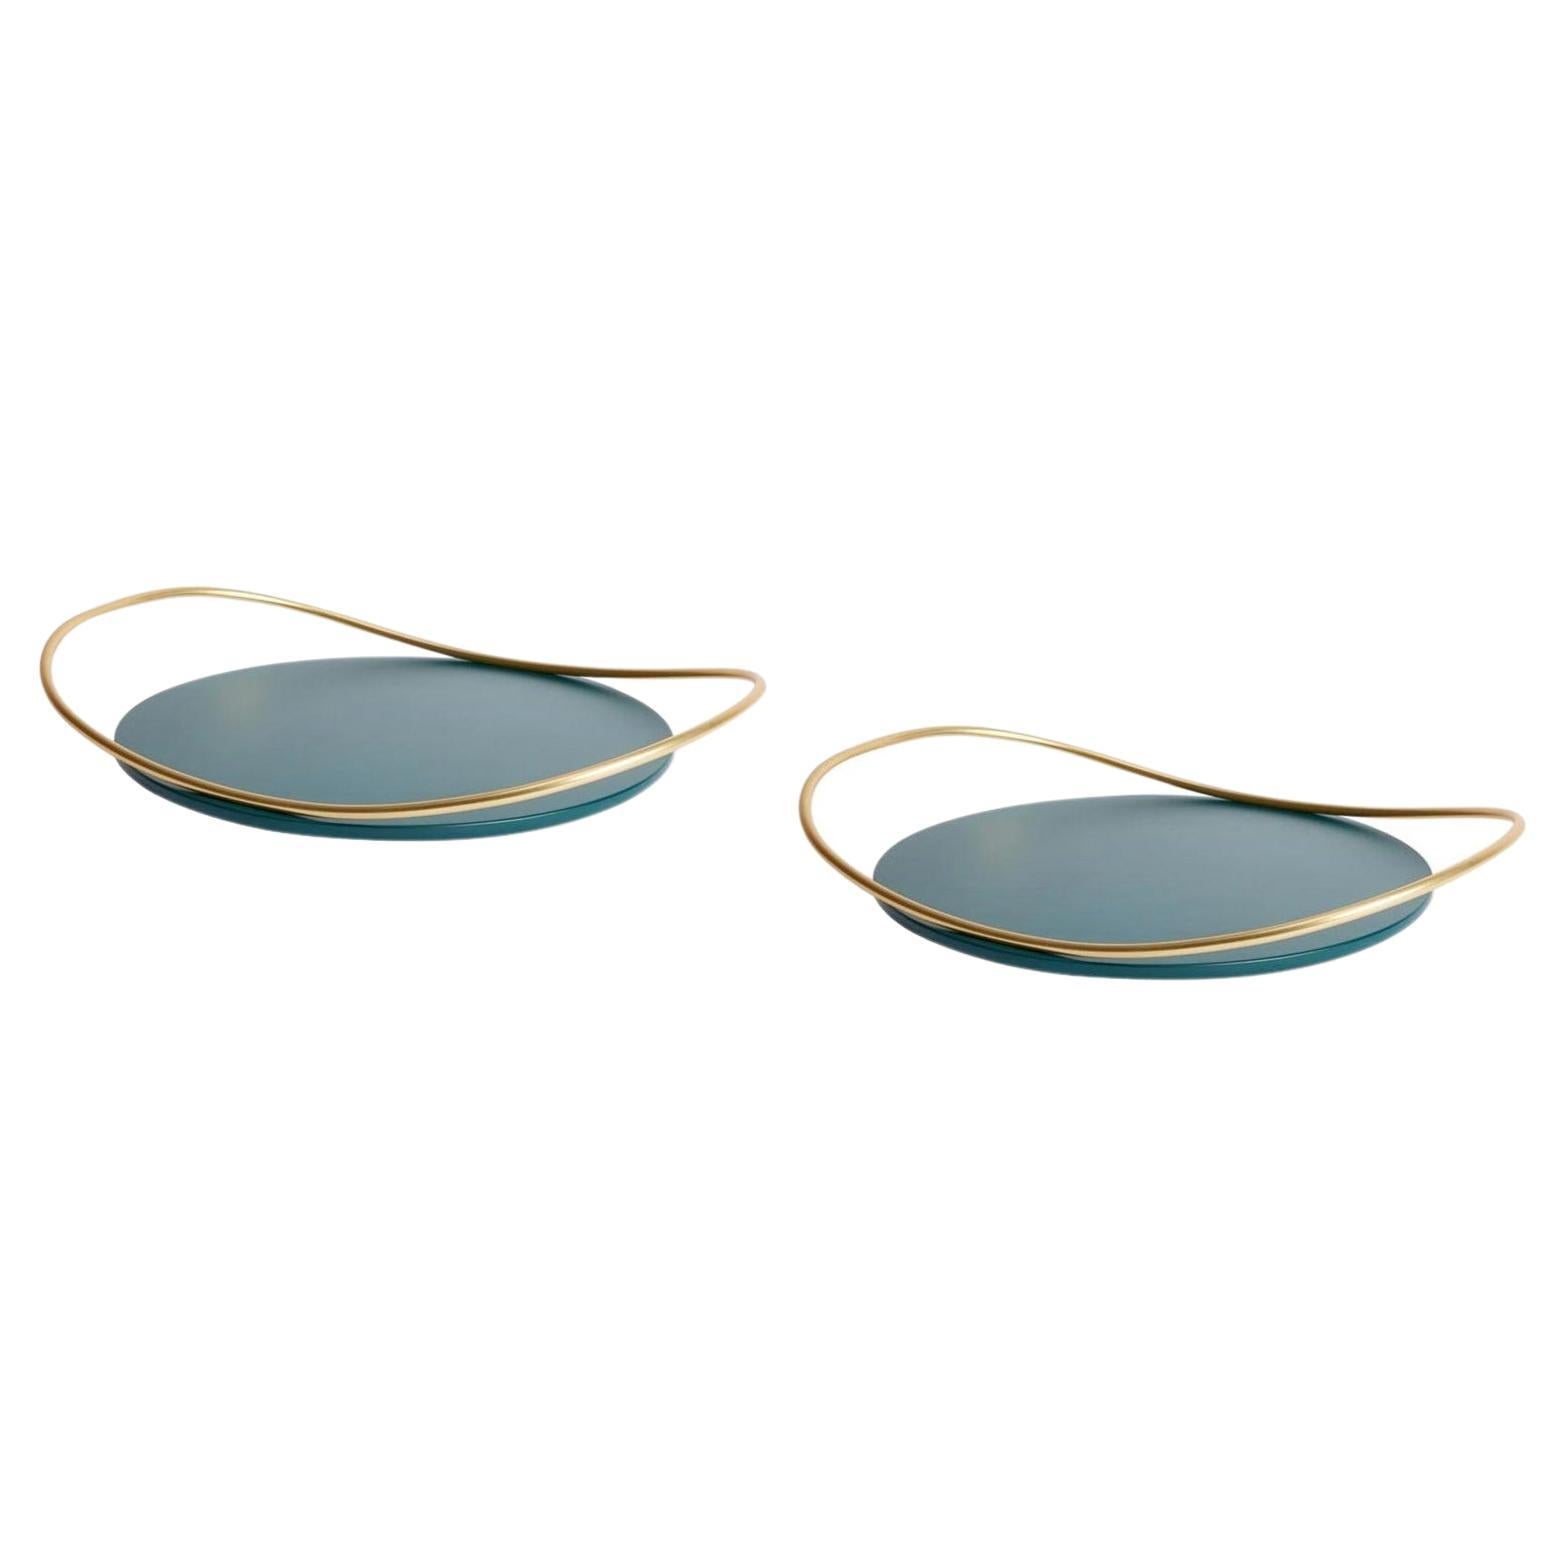 Pair of Petrol Green Touché B Tray by Mason Editions For Sale